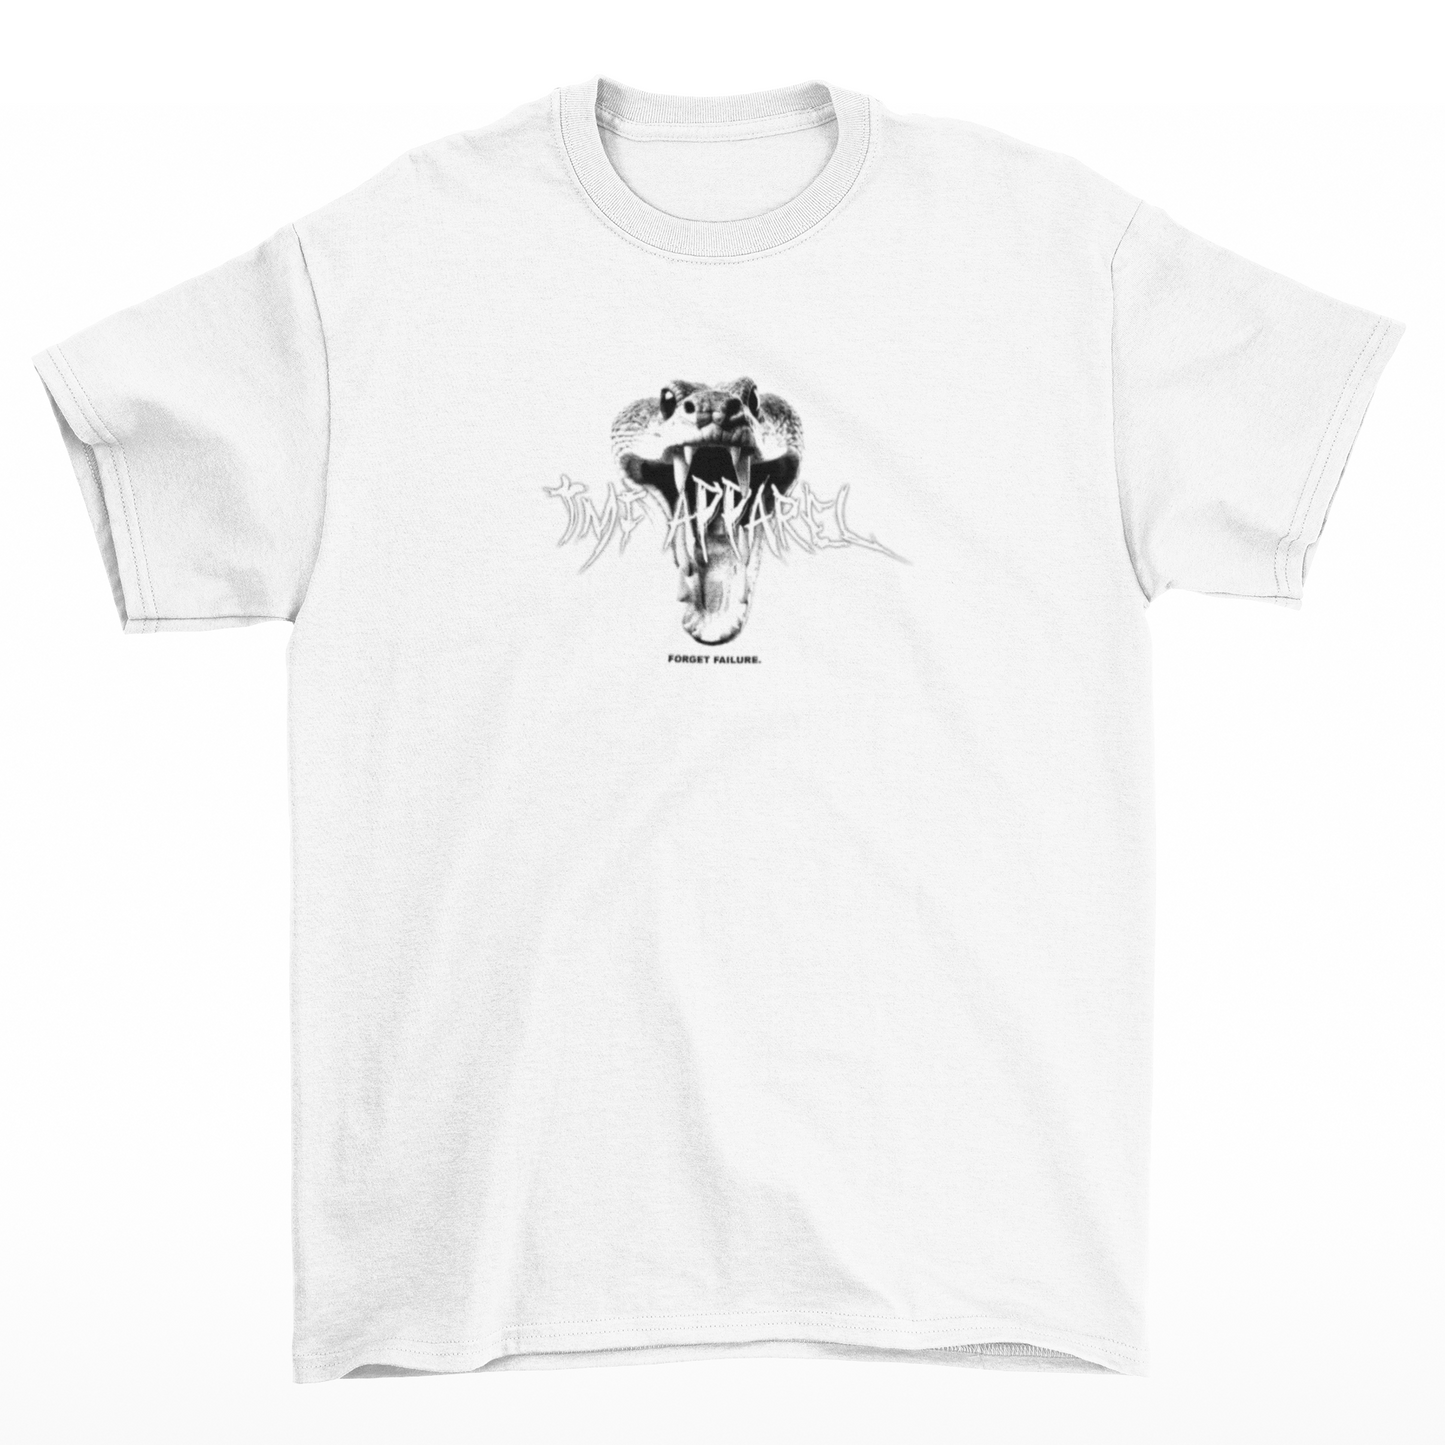 TMF Apparel Snake Graphic Tee